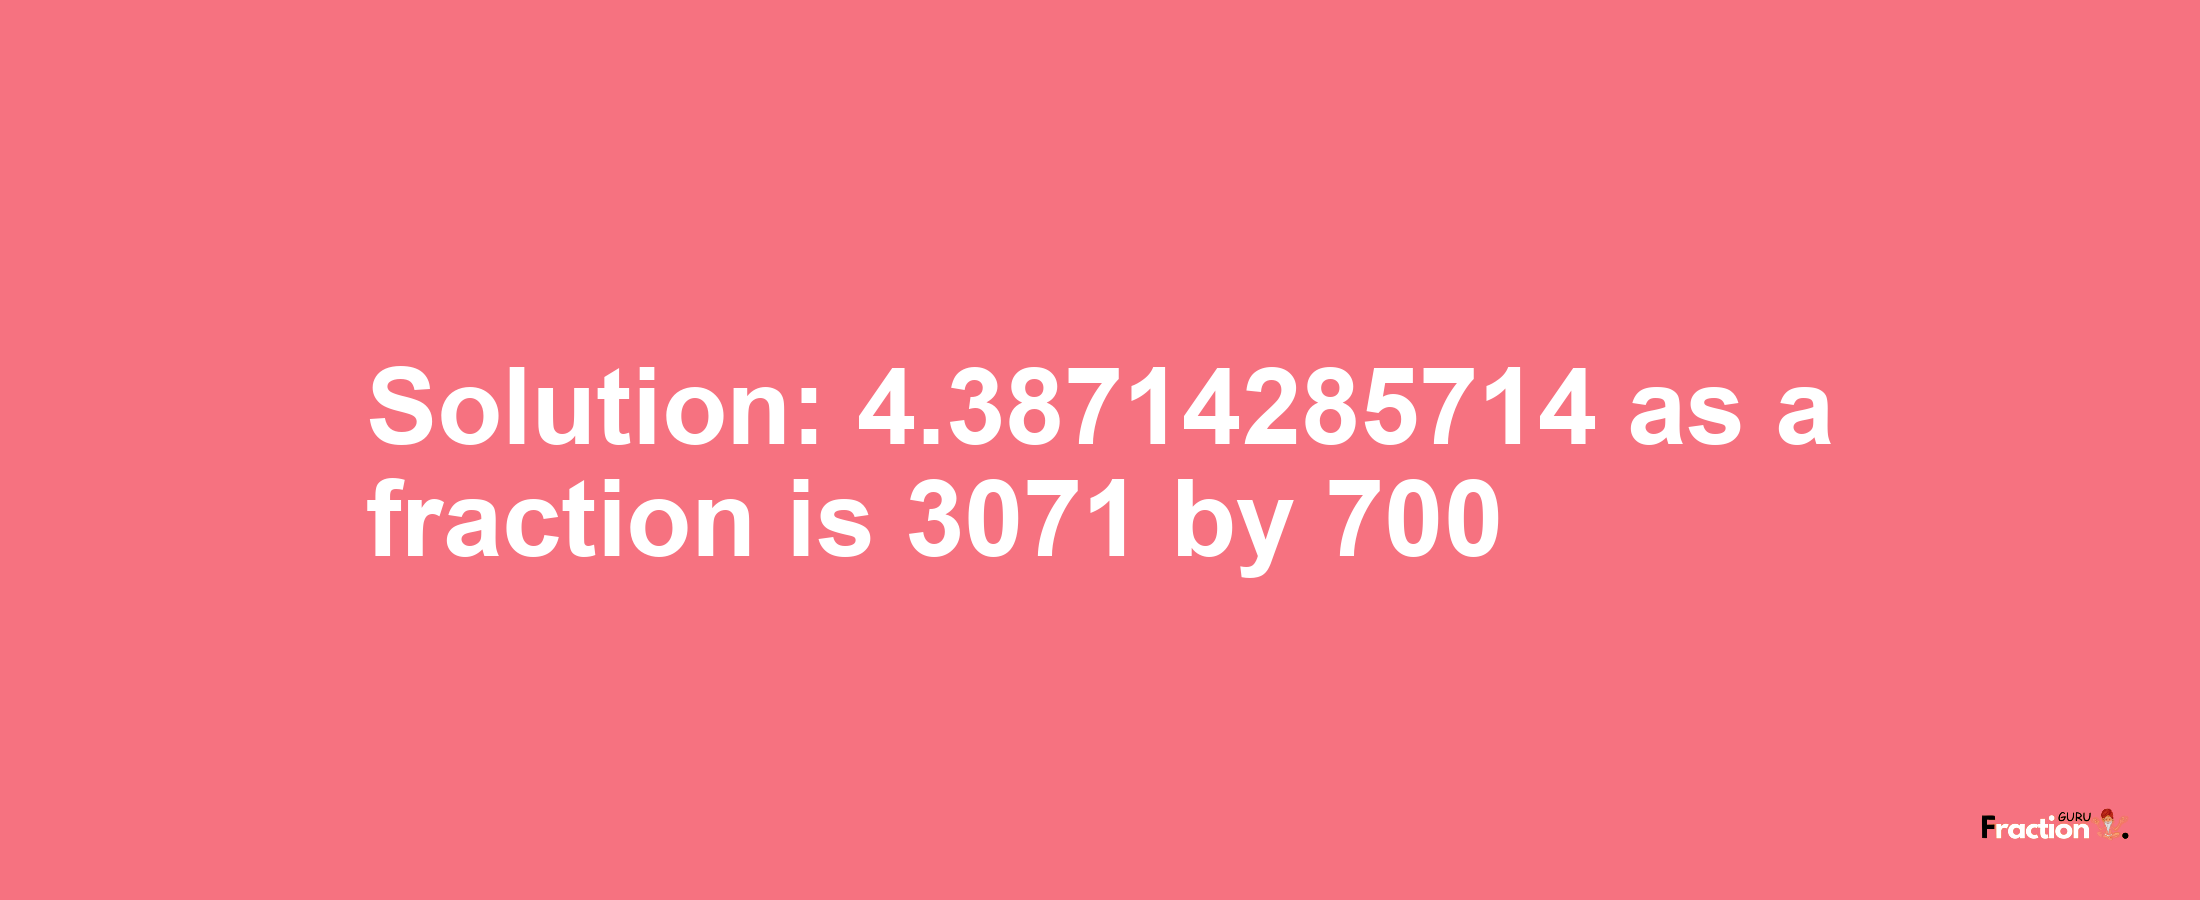 Solution:4.38714285714 as a fraction is 3071/700